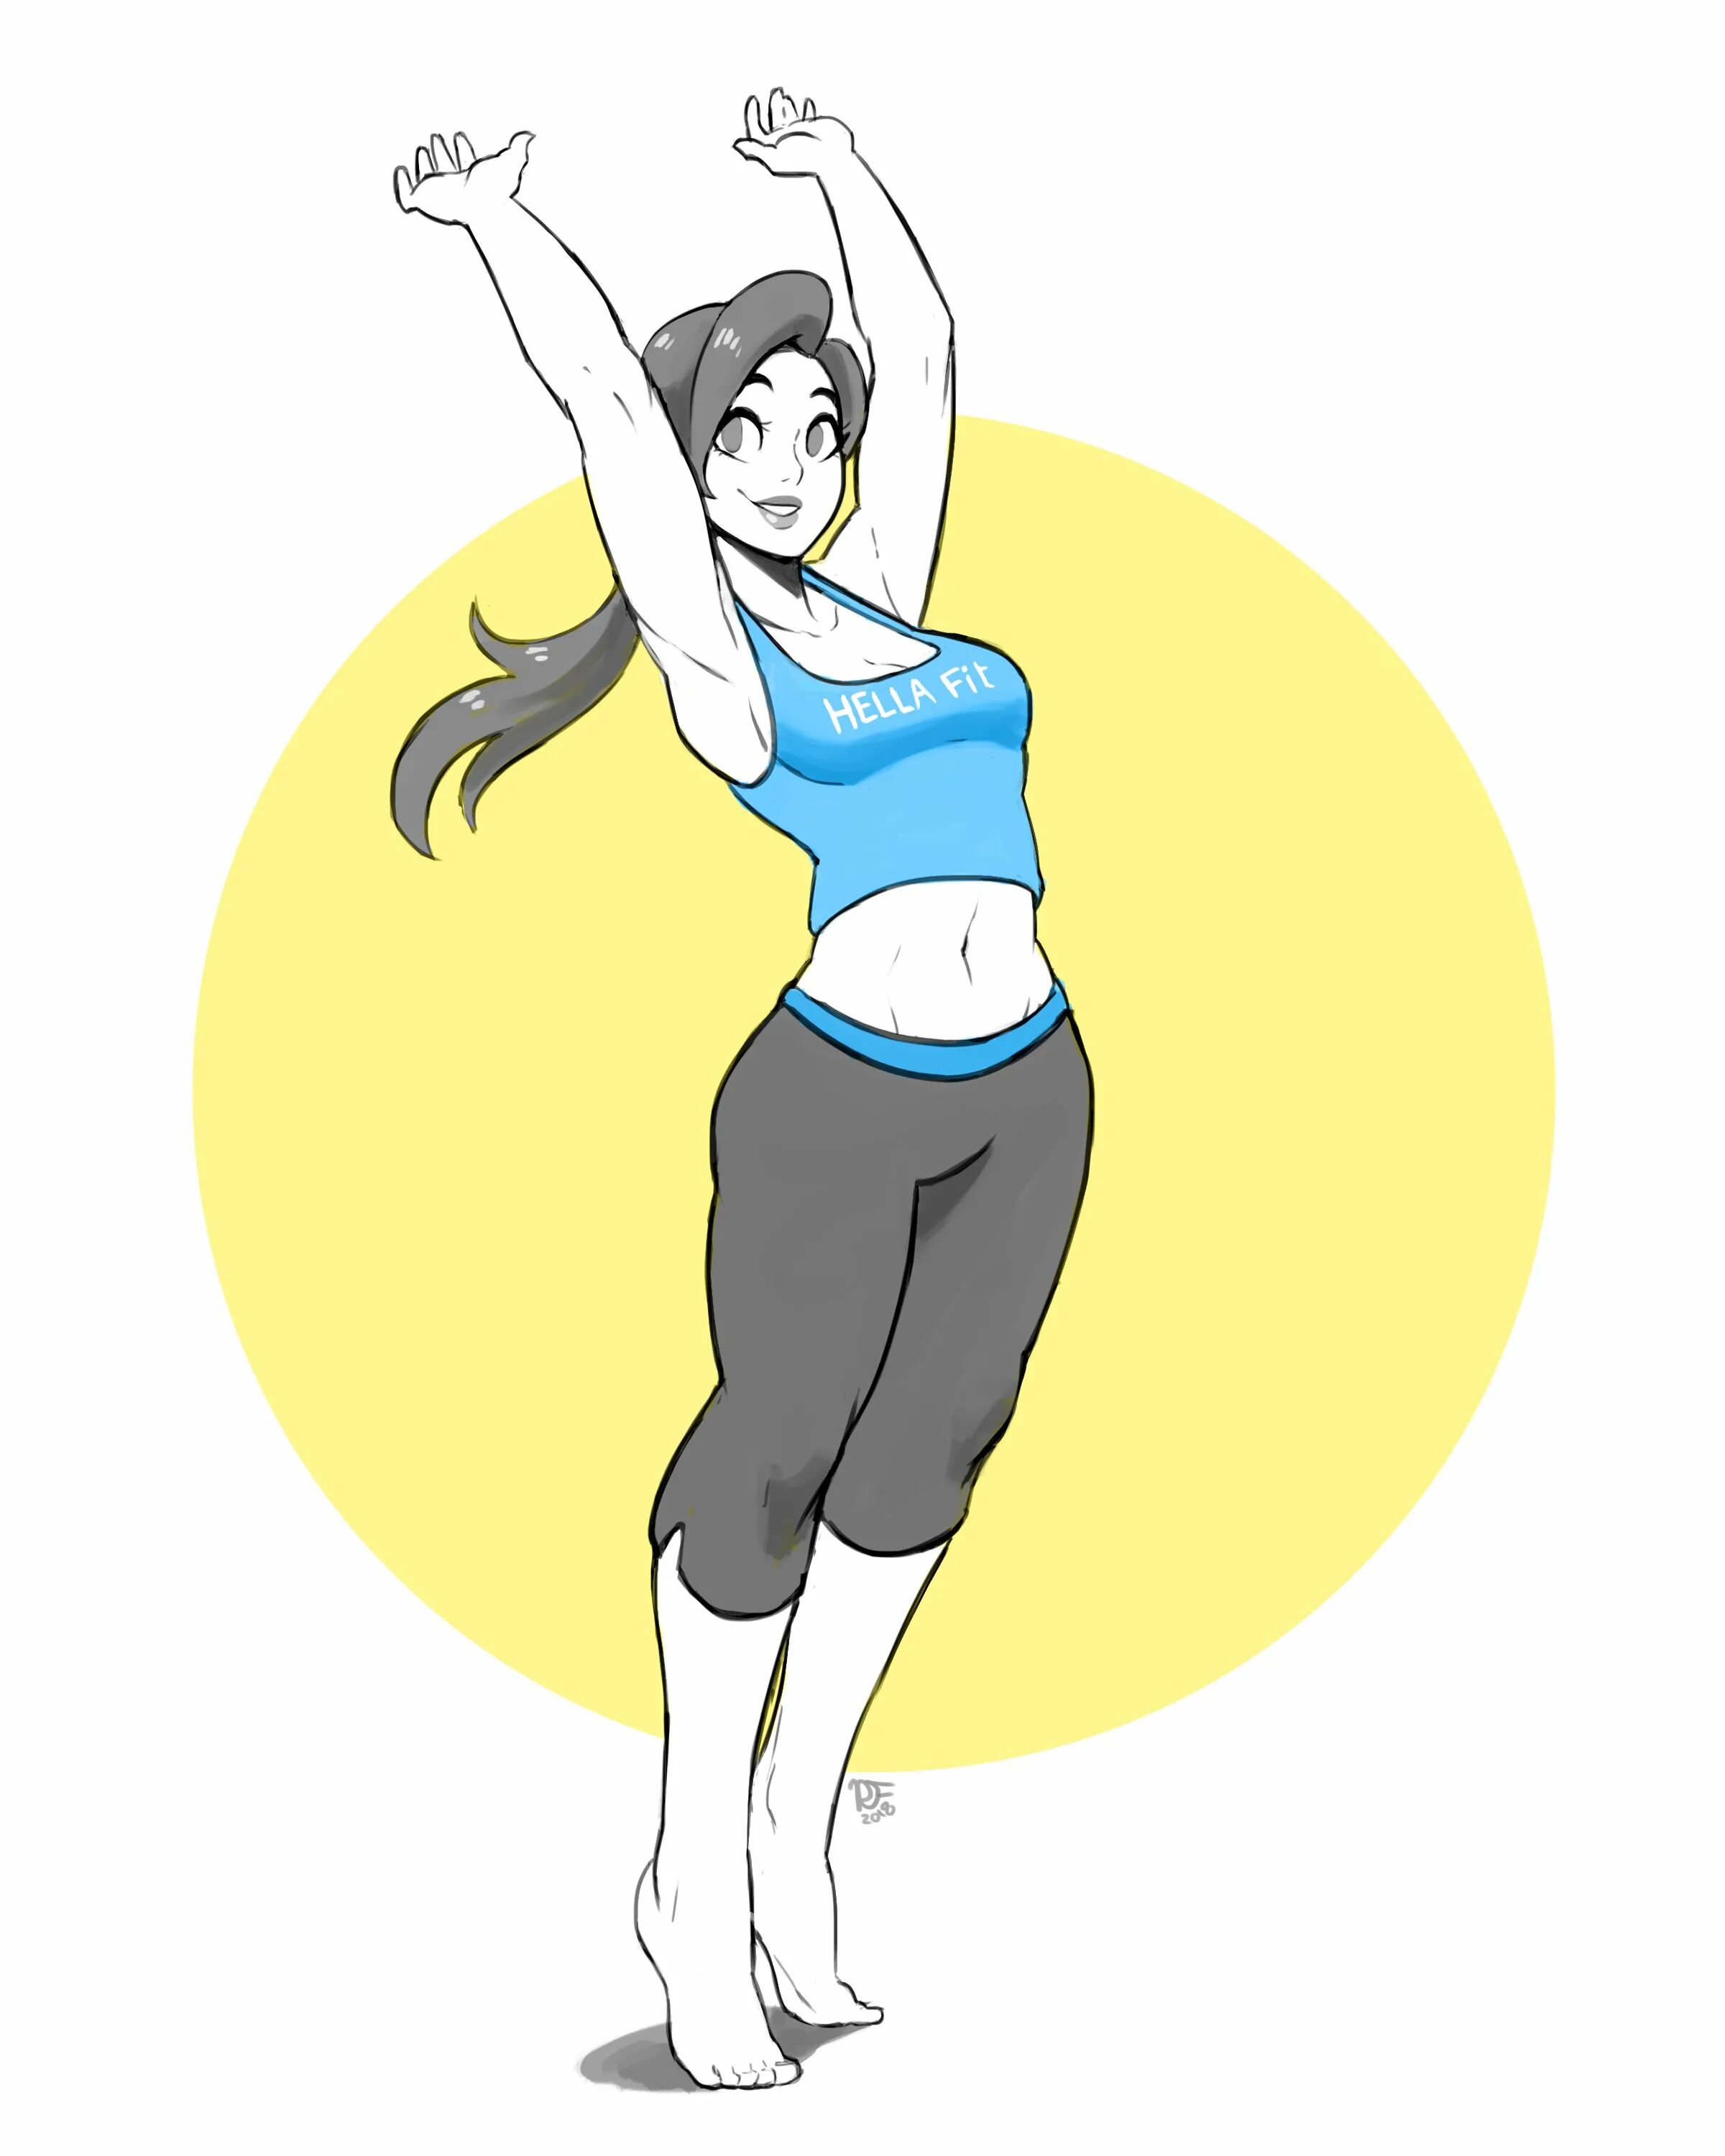 Wii fit. Тренер Wii Fit Art. Wii Fit Trainer арт. Nintendo Wii Fit Trainer. Wii Fit Trainer арт 18.